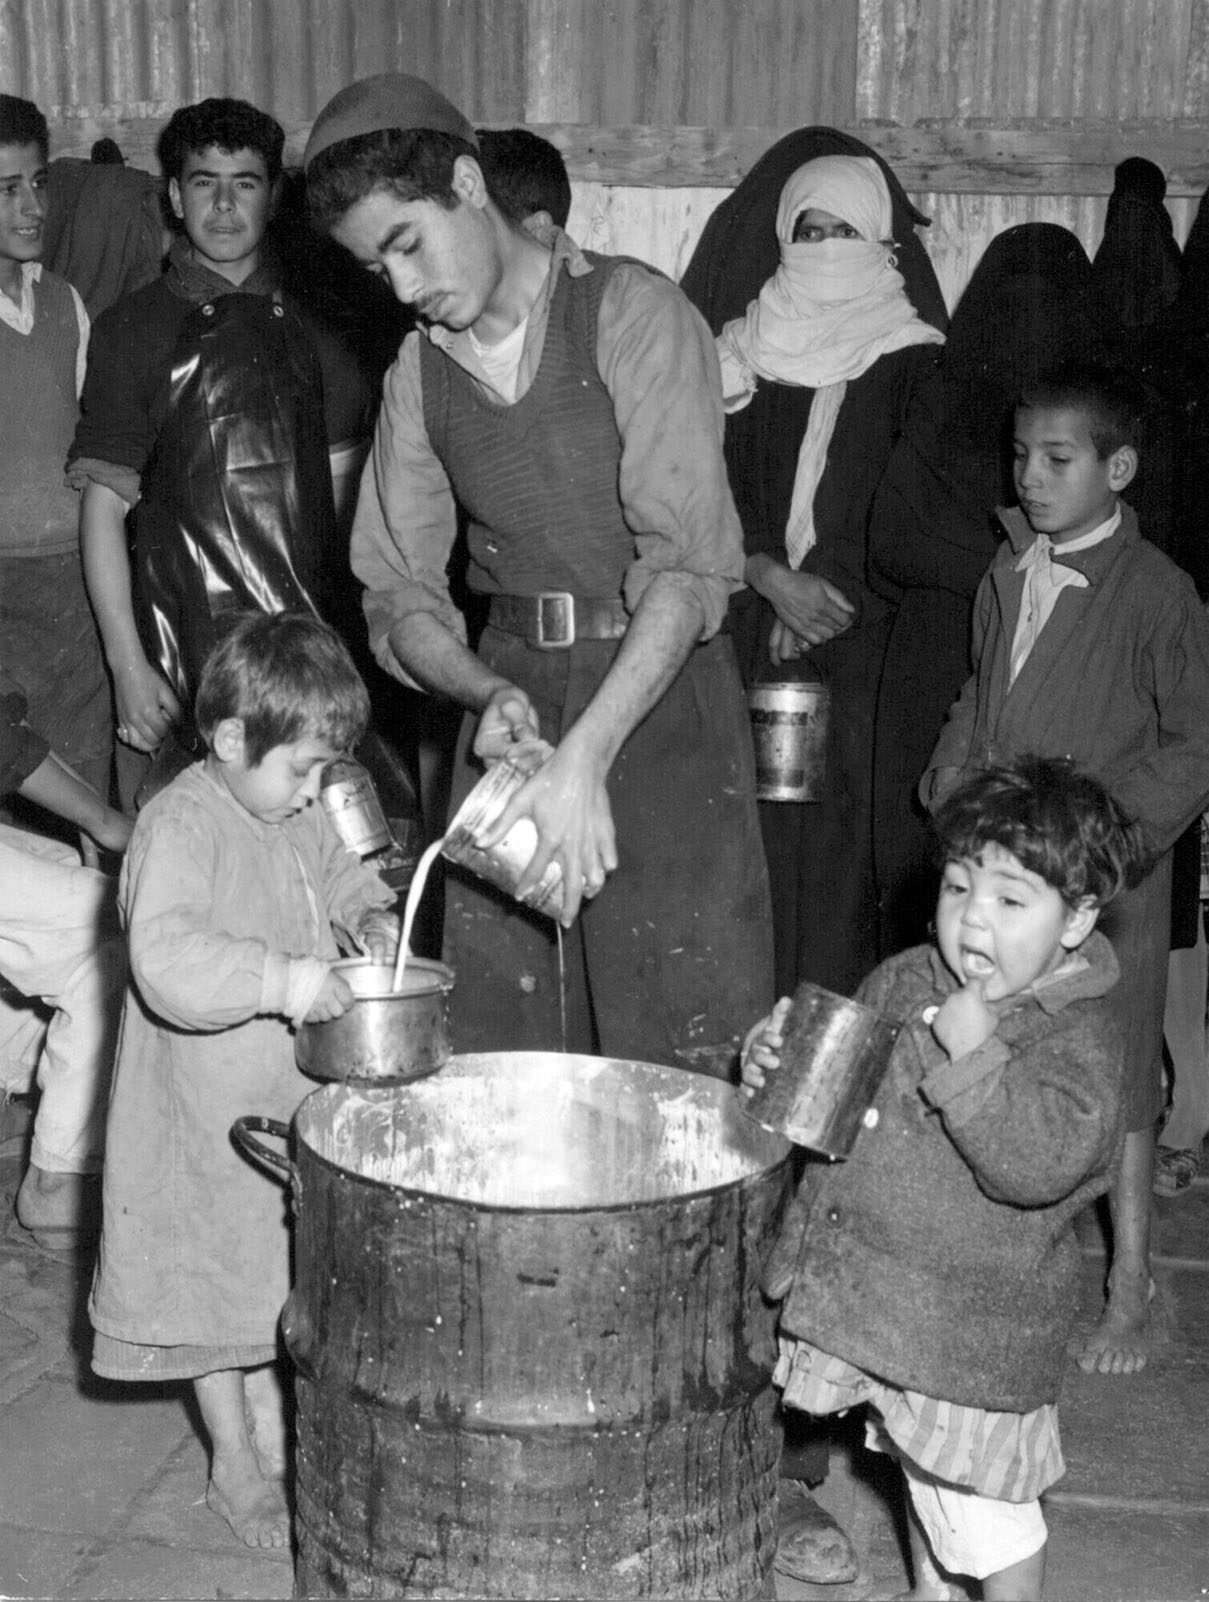 Aid worker in Gaza serving soup to young children